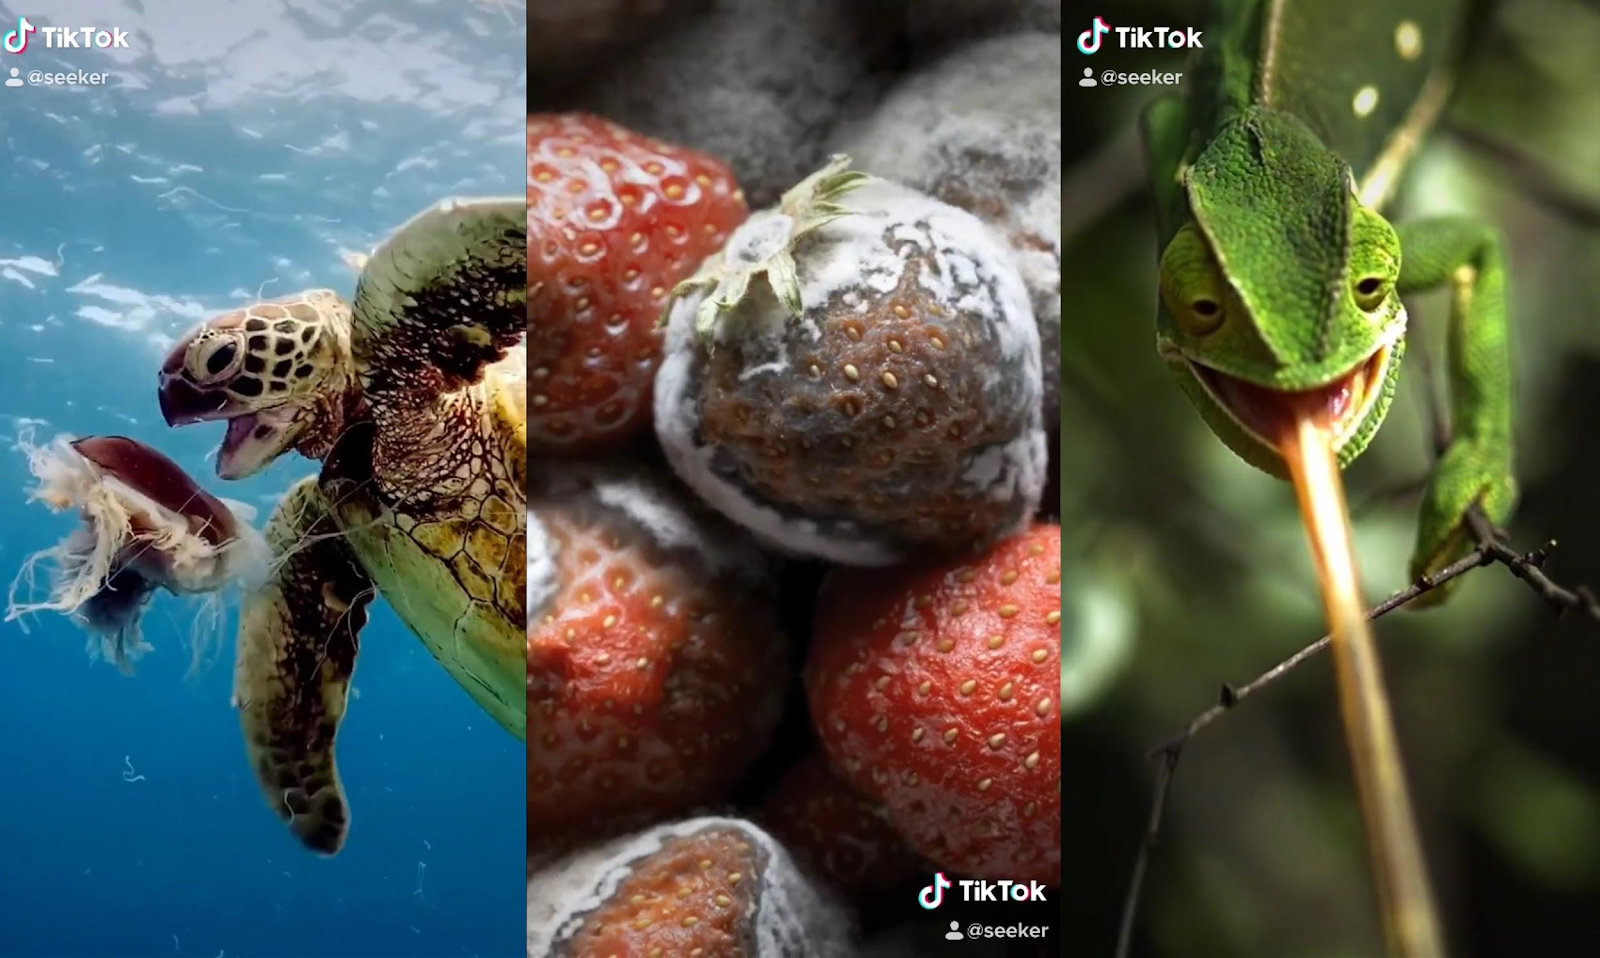 a screen grab from seeker featuring images of a turtle, lizard and strawberry on tiktok